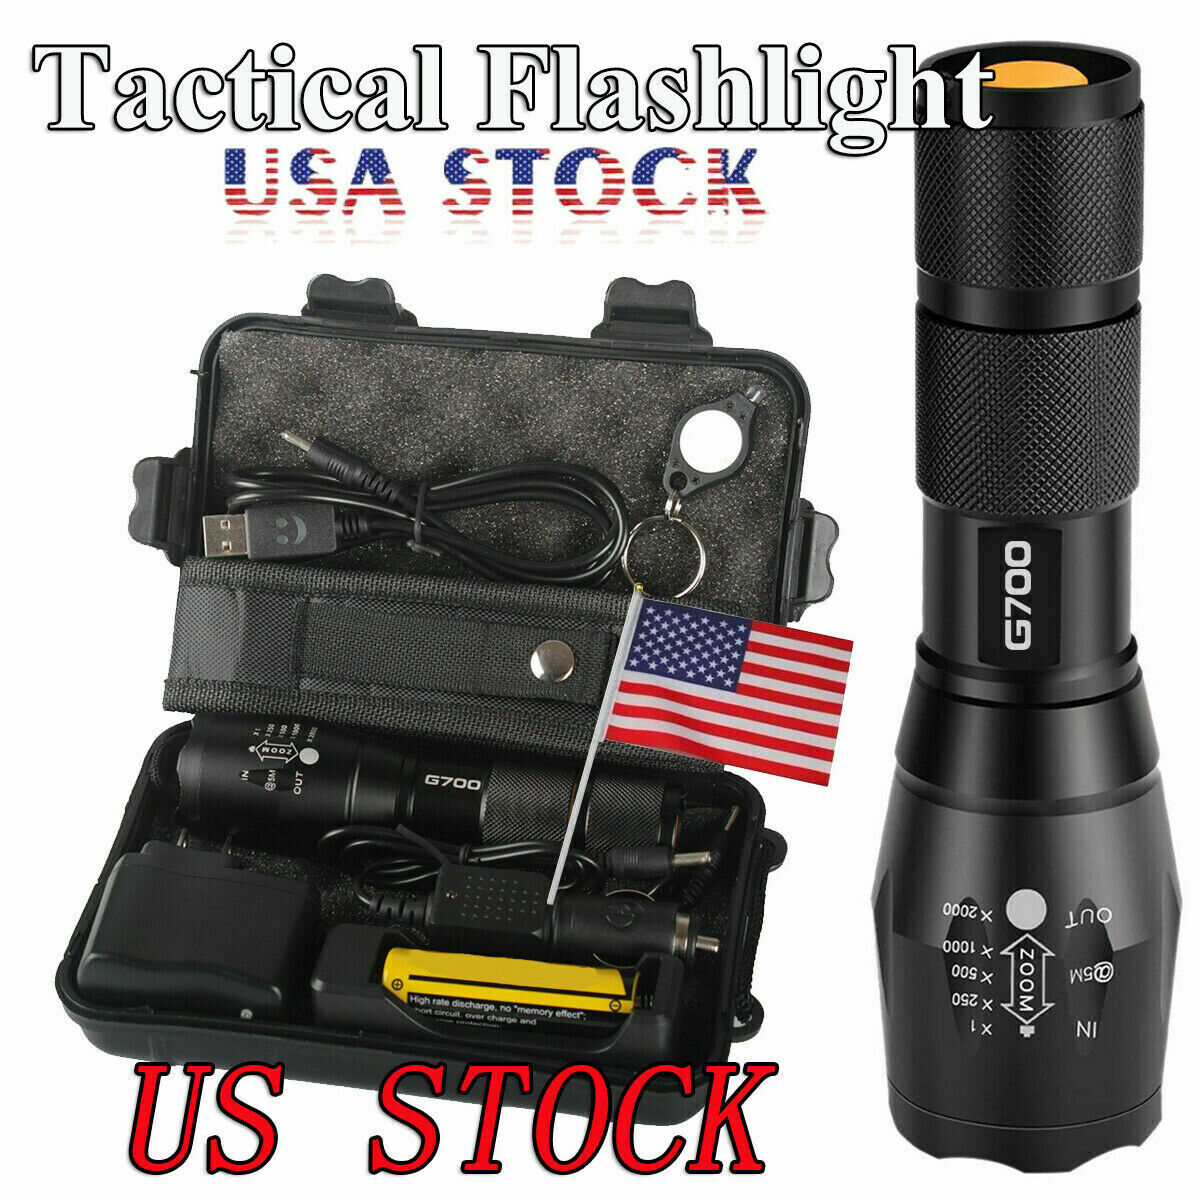 Bright 90000lm Genuine  G700 LED Tactical Flashlight Military Torch